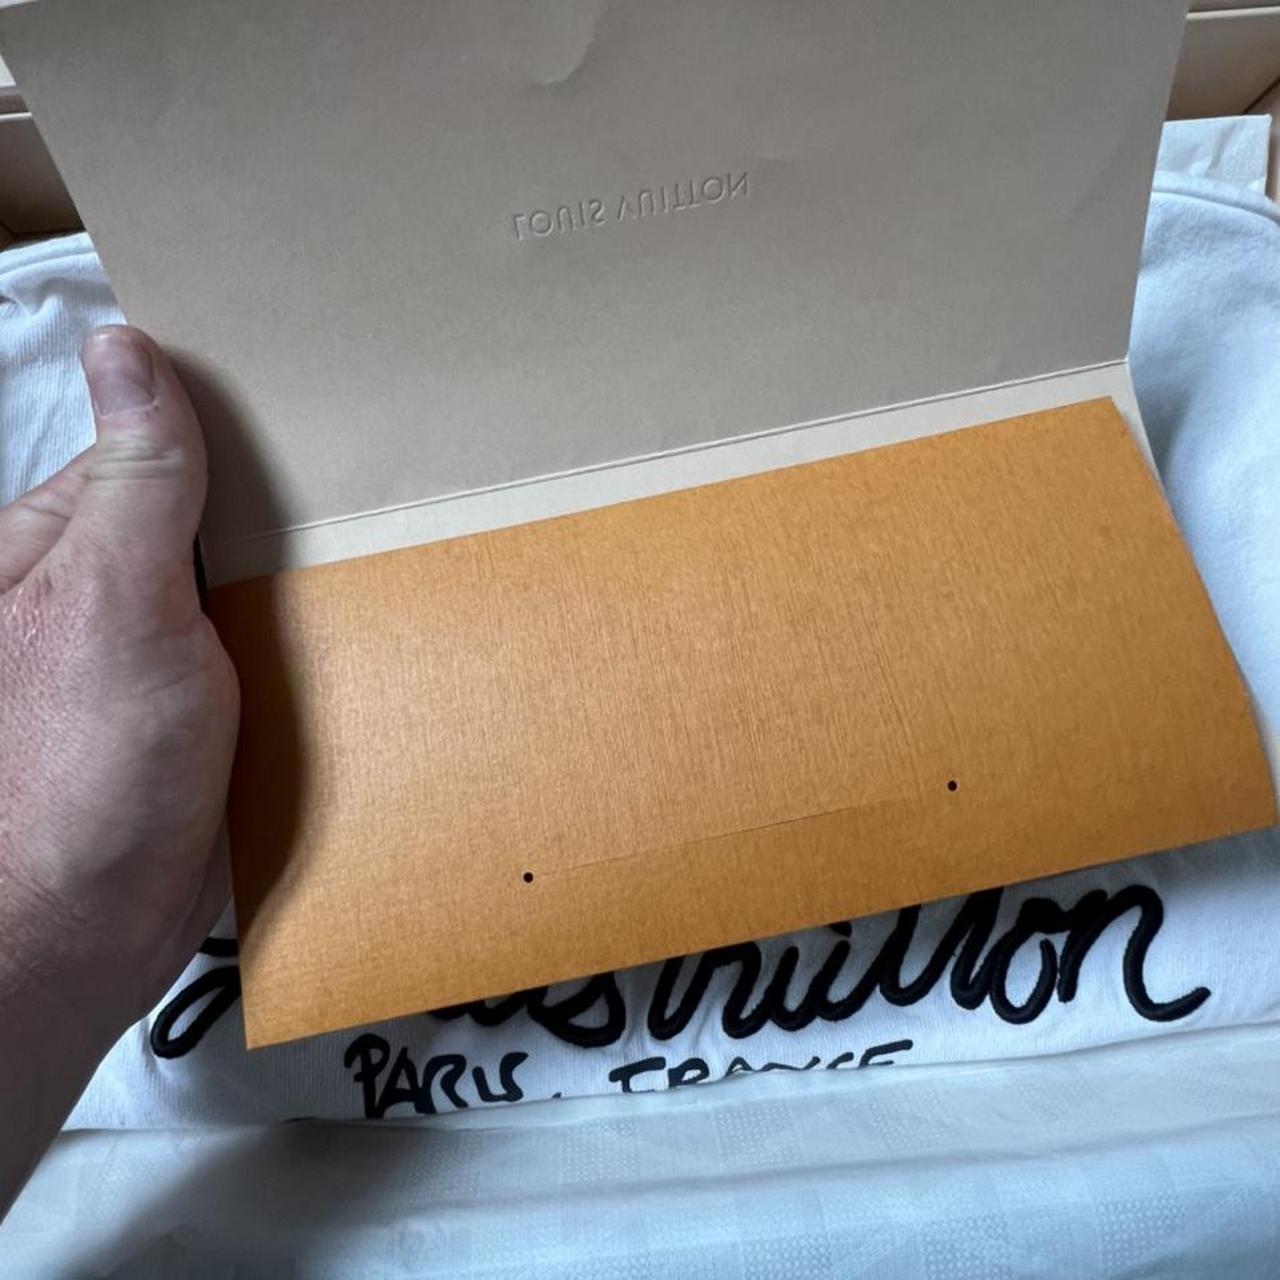 Authentic Louis Vuitton new edition gift box ideal - Depop